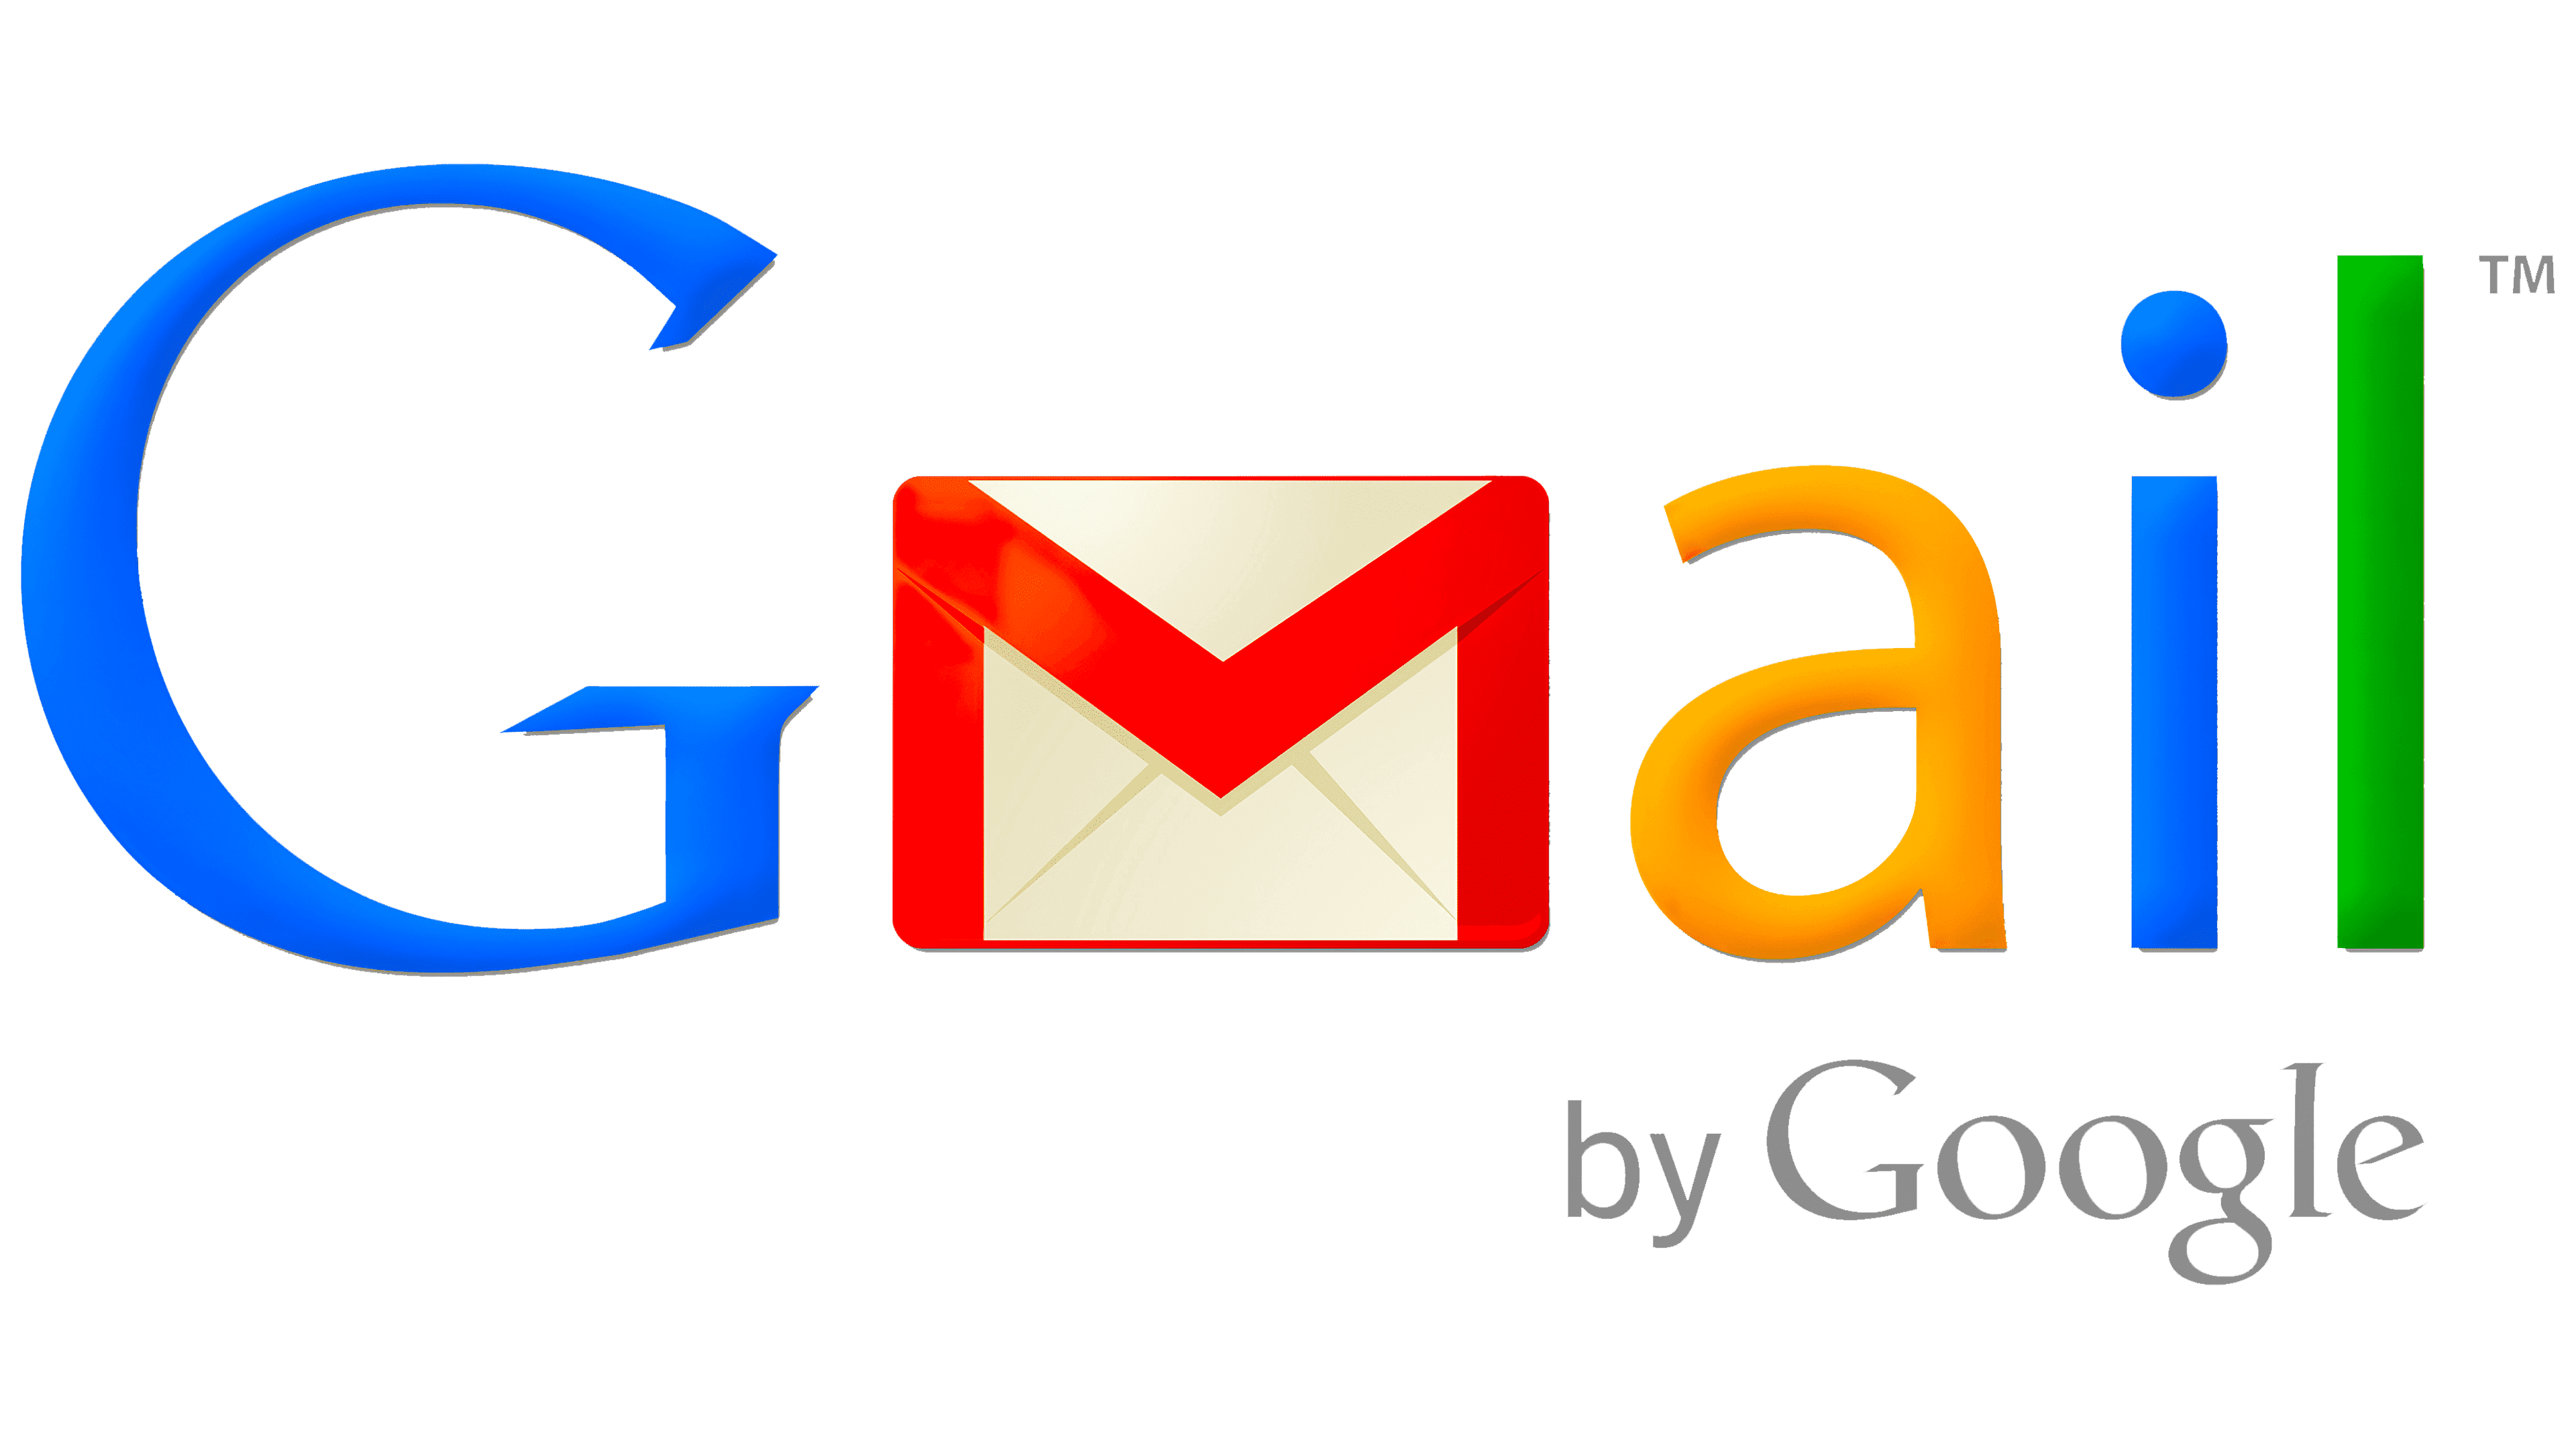 How to Set Gmail as Your Browser's Default Email Client for Mailto Links